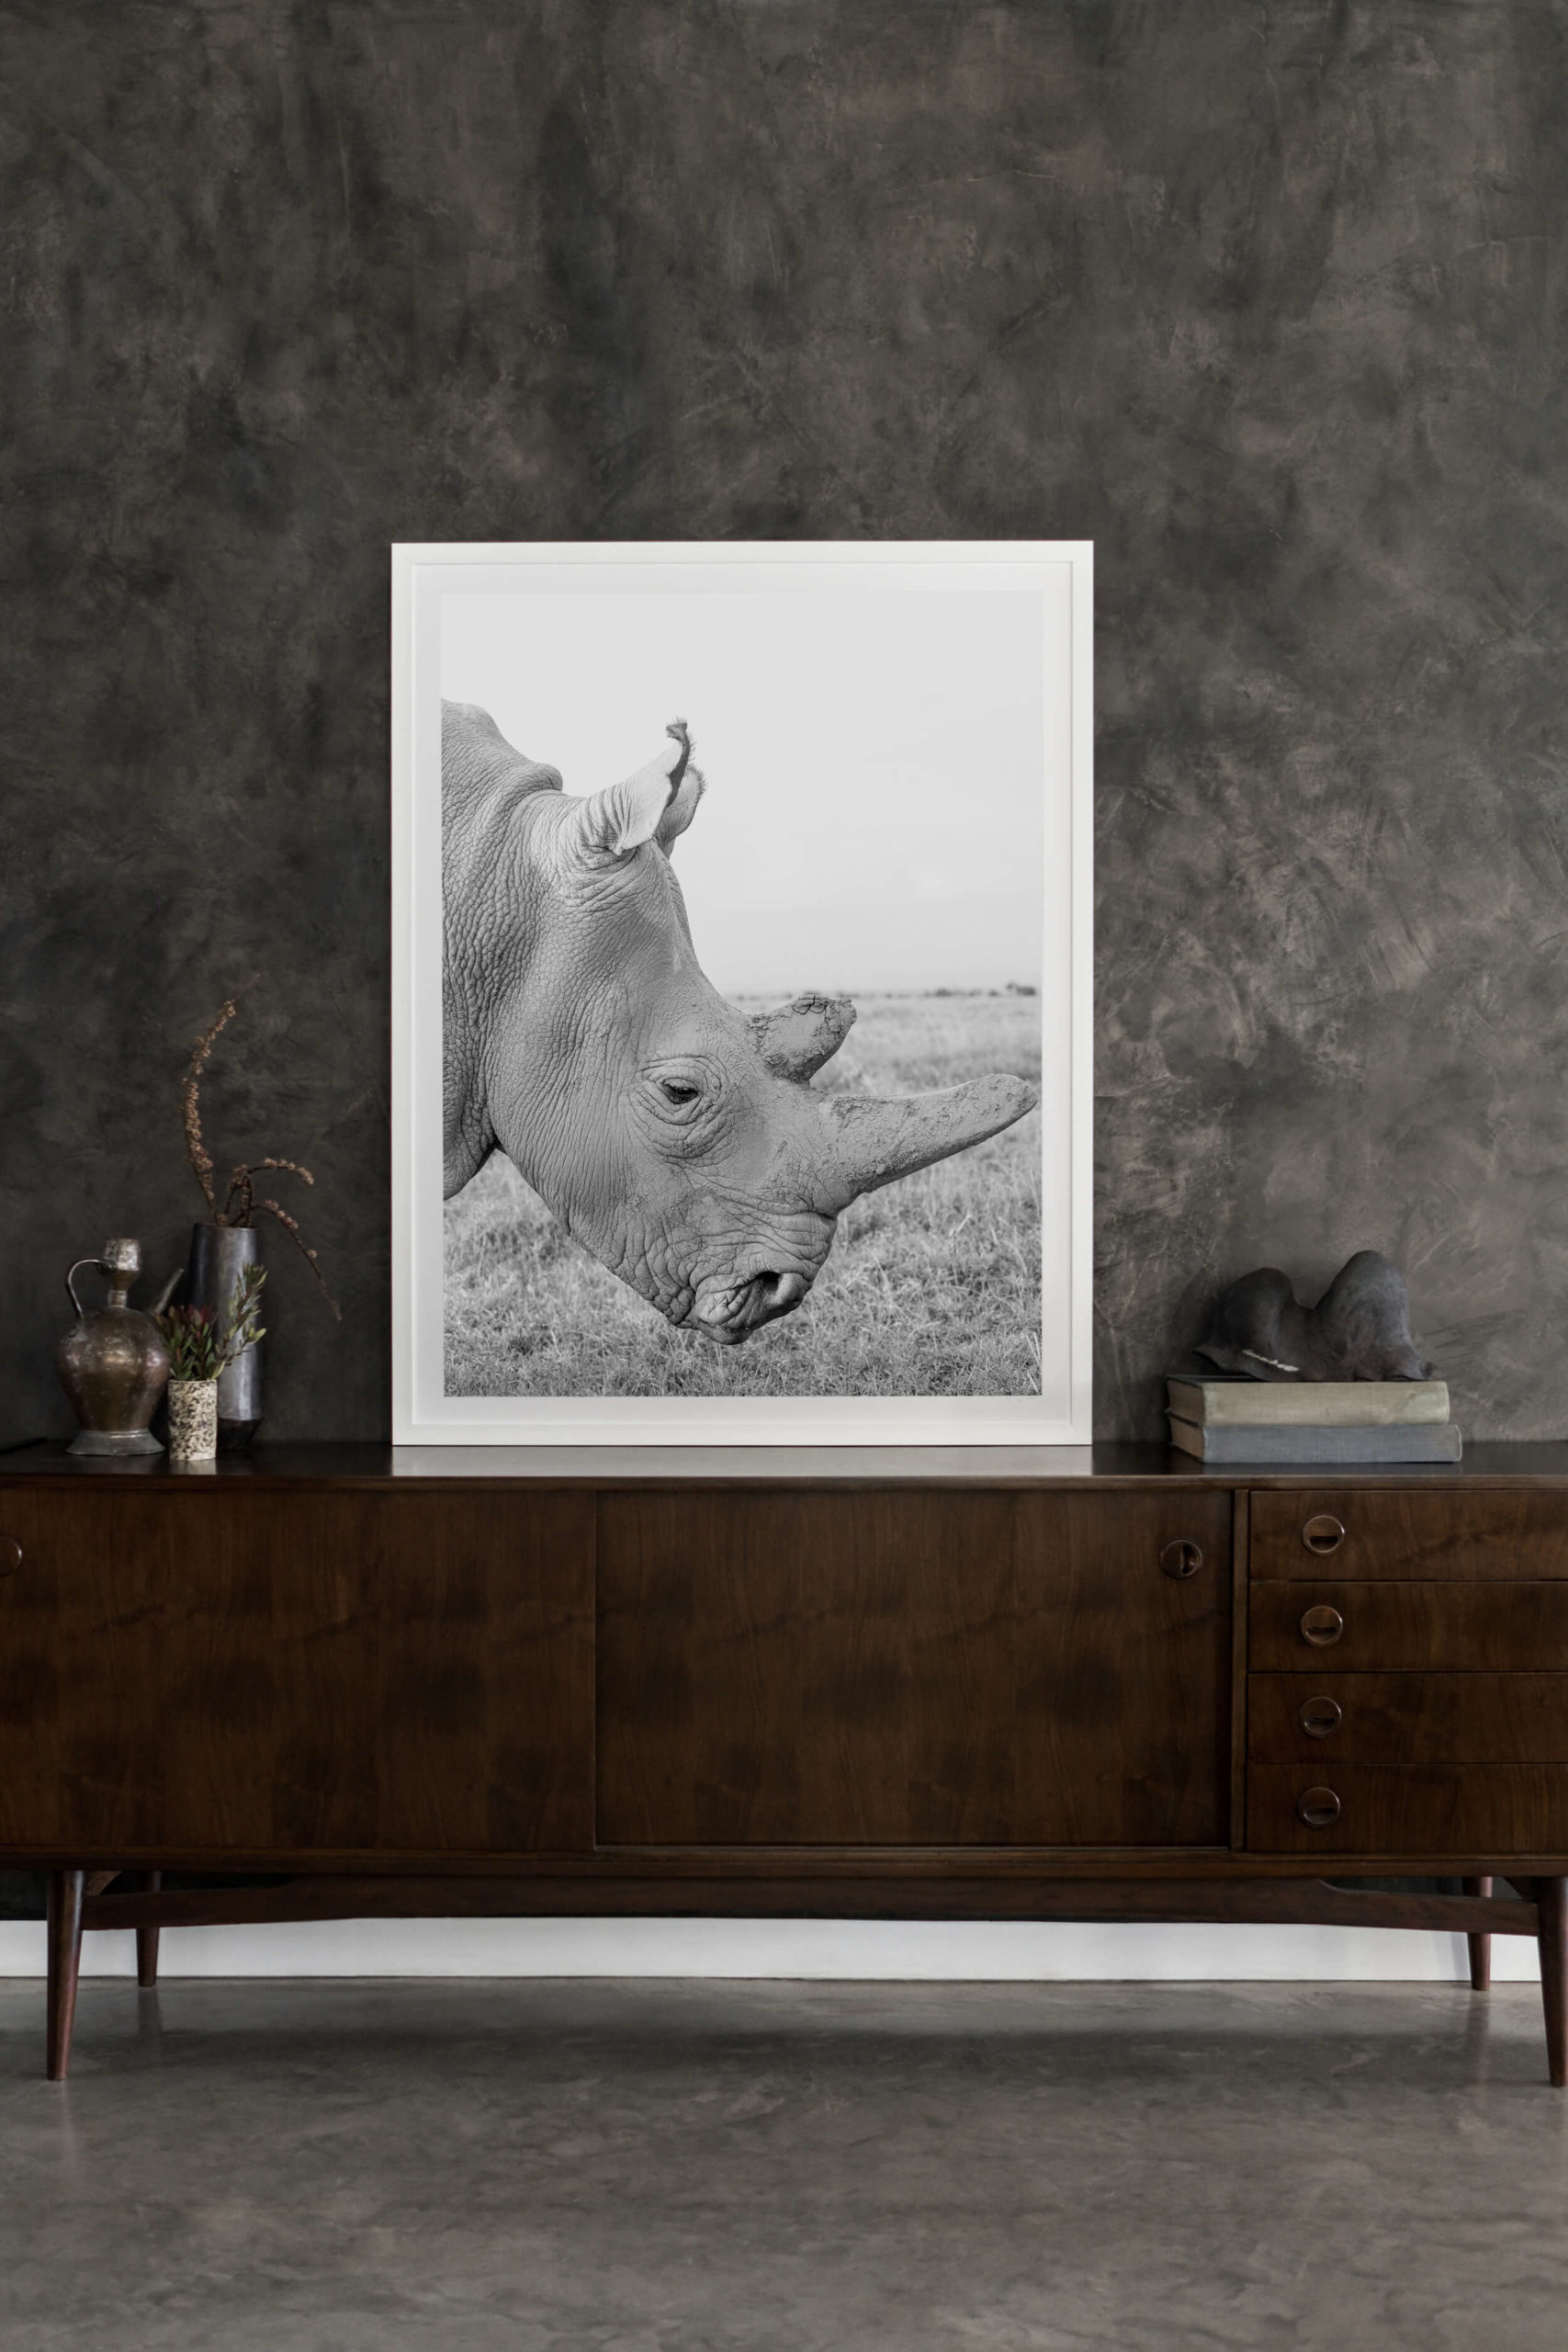 raise awareness for endangered species with wildlife fine art gifts